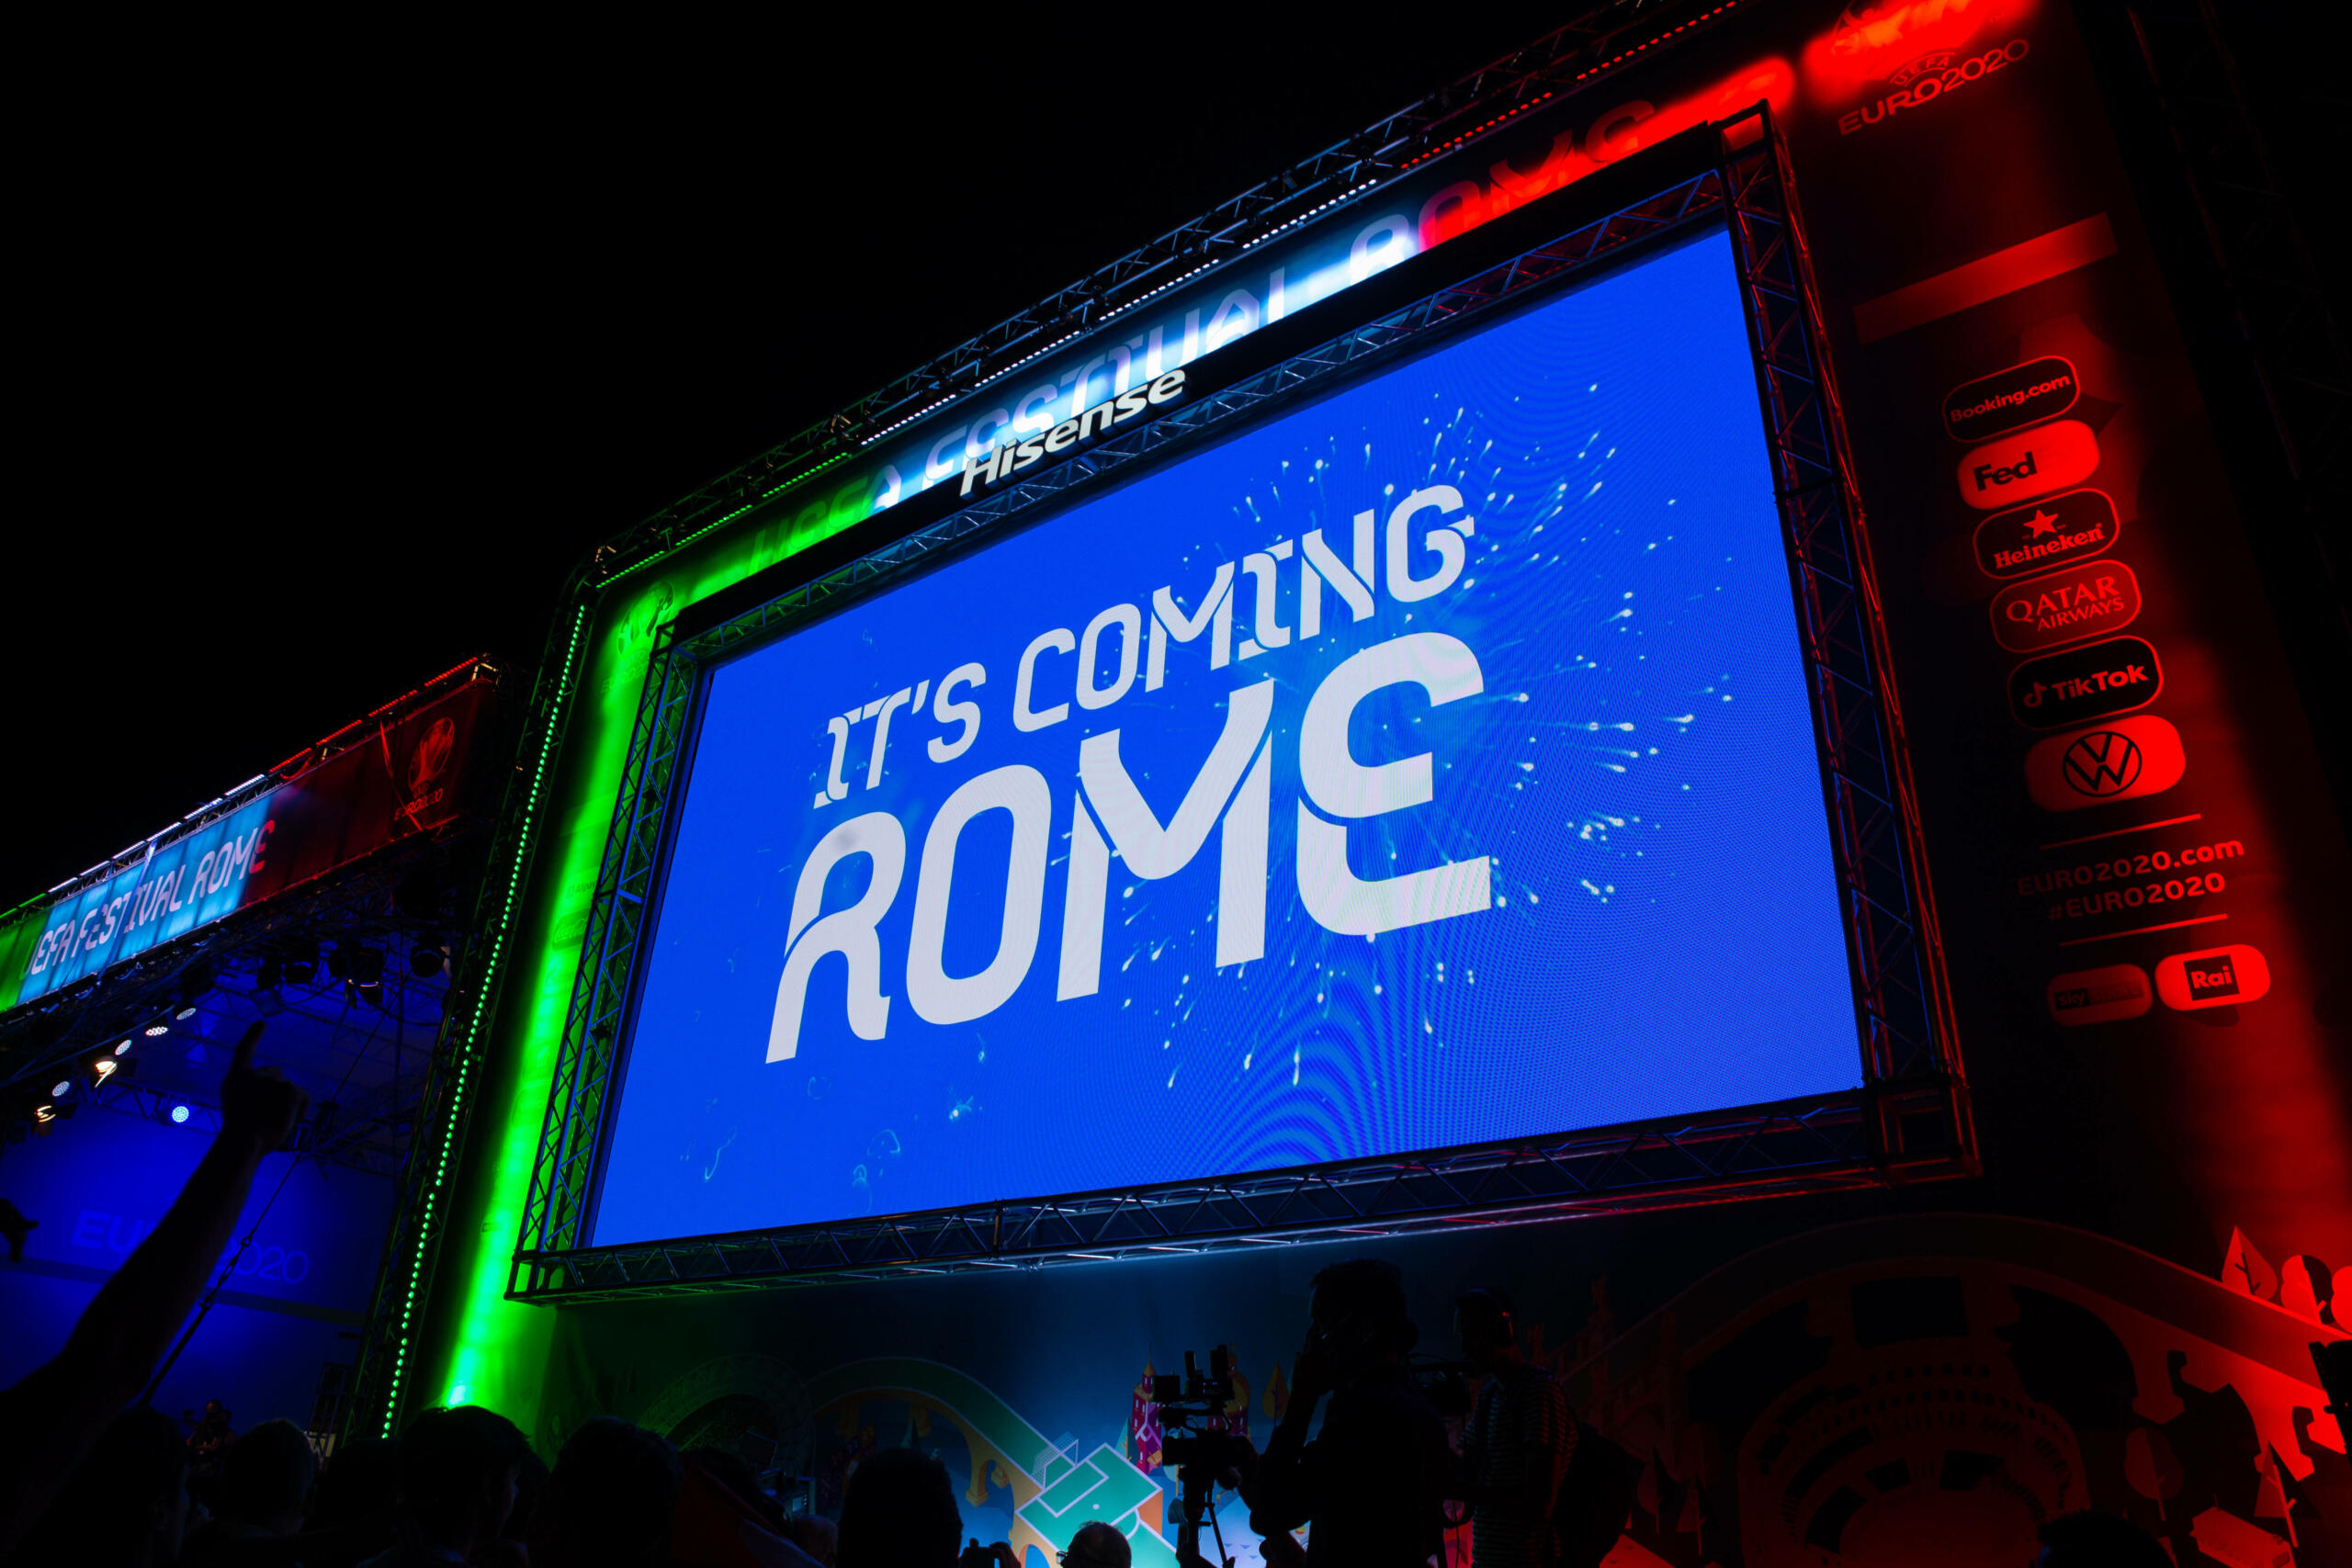 It's coming Rome